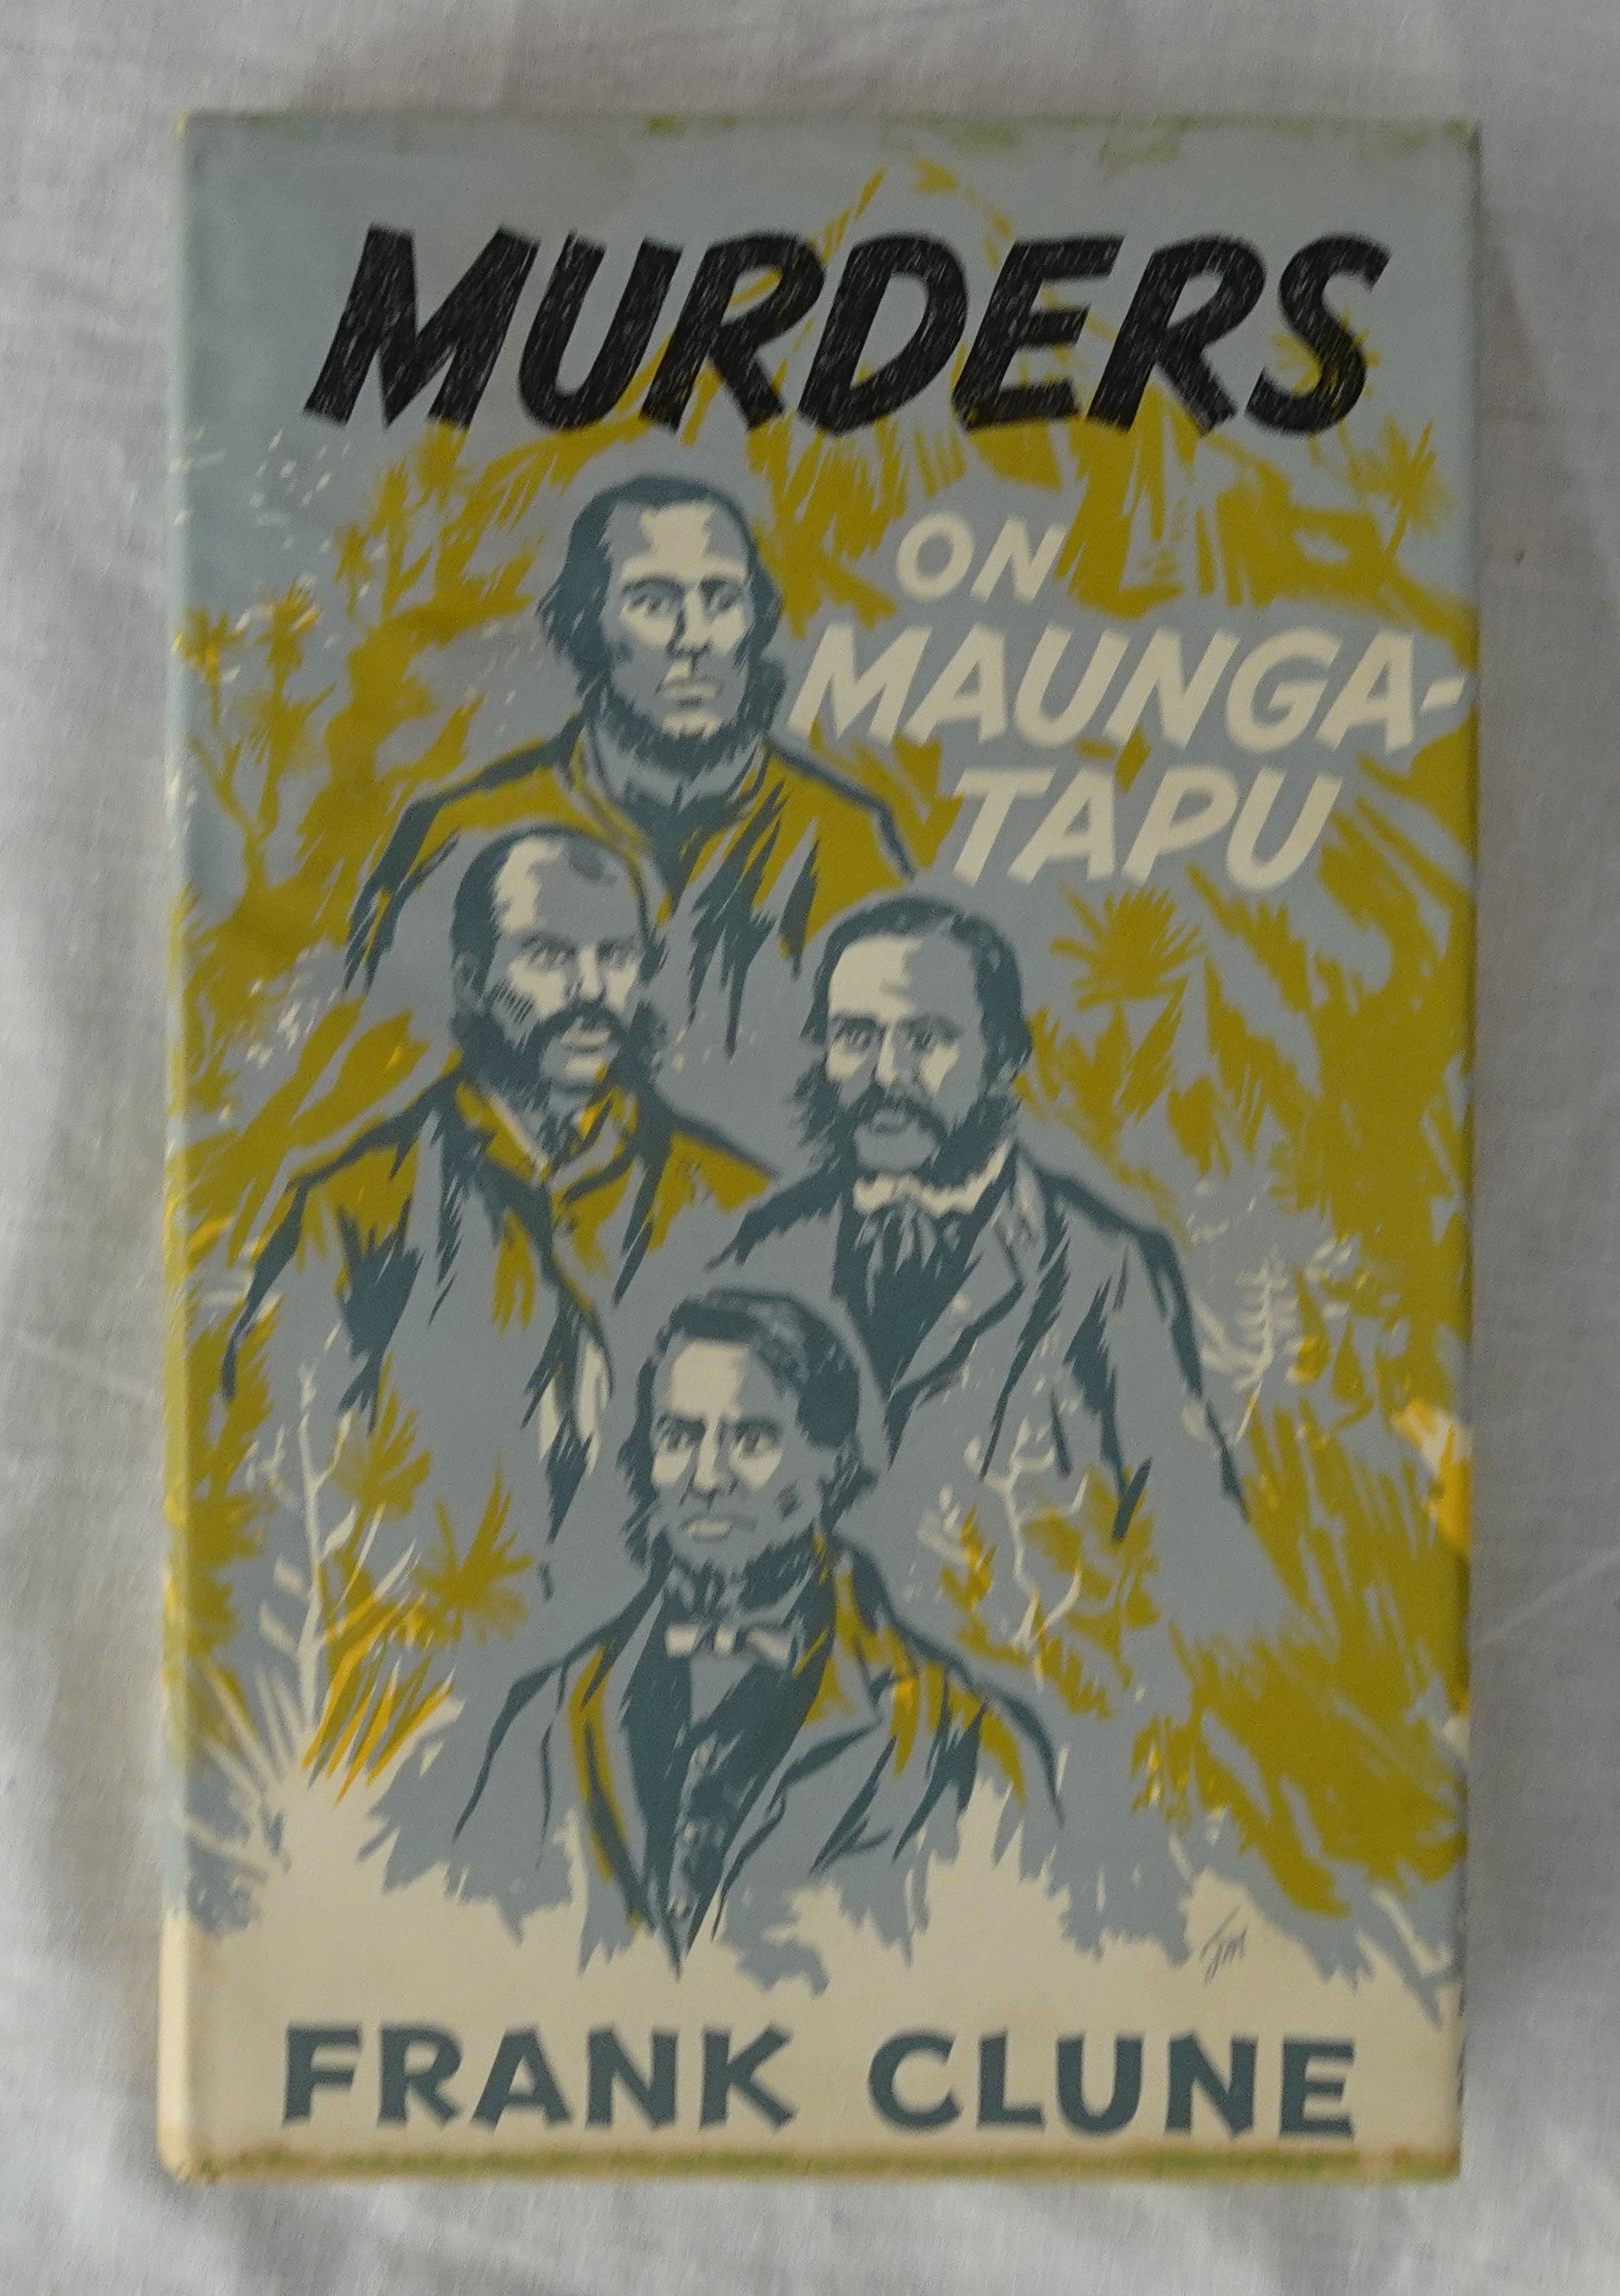 Murders on Maunga-tapu  A history of the crimes committed on the lonely slopes of Maunga-tapu (“the Sacred Mountain”) in New Zealand in the year 1866  by Frank Clune